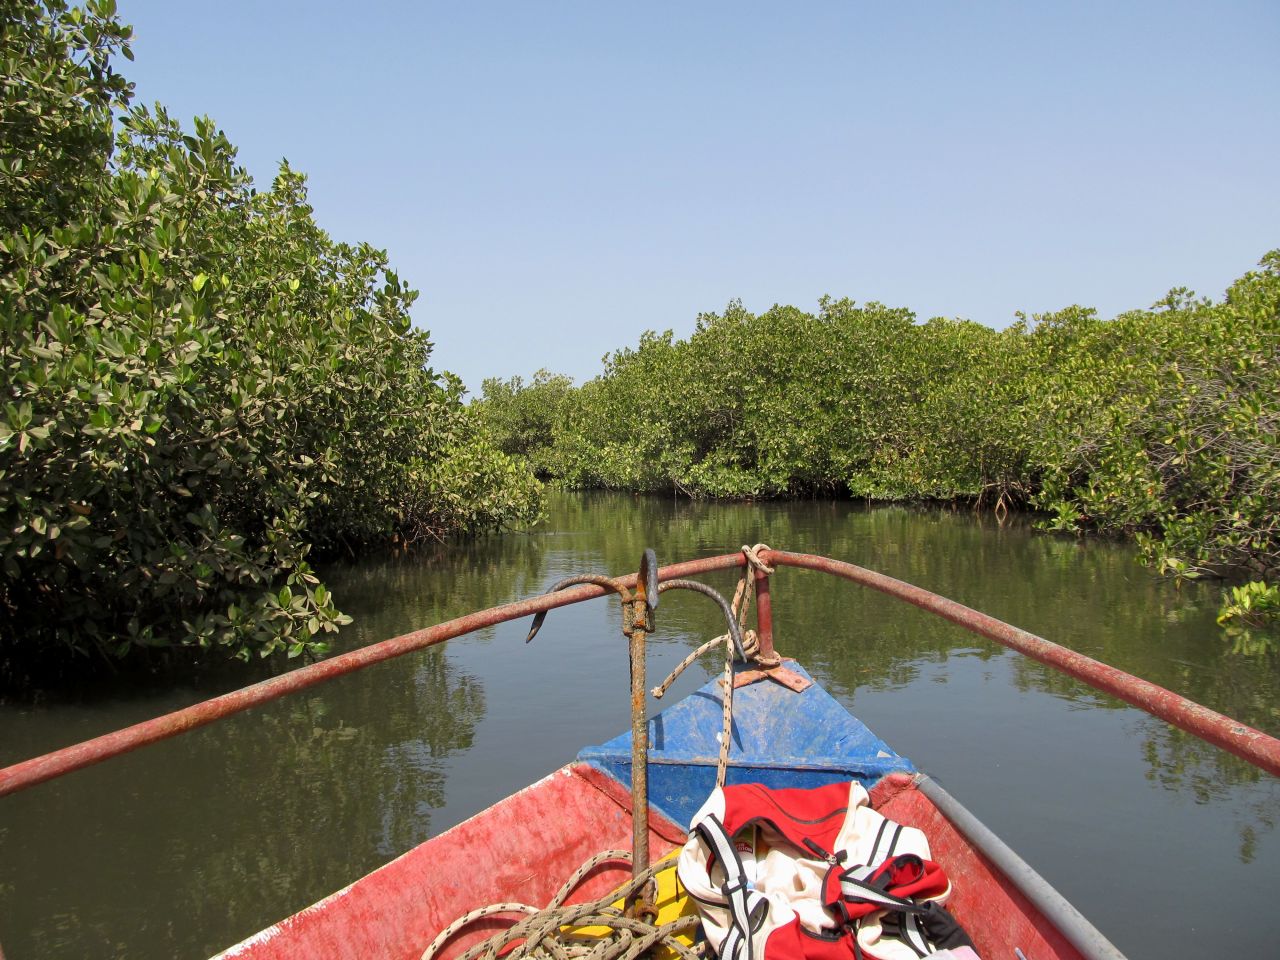 Time slows down with a journey into the Sine Saloum region's labyrinth of mangrove creeks. 